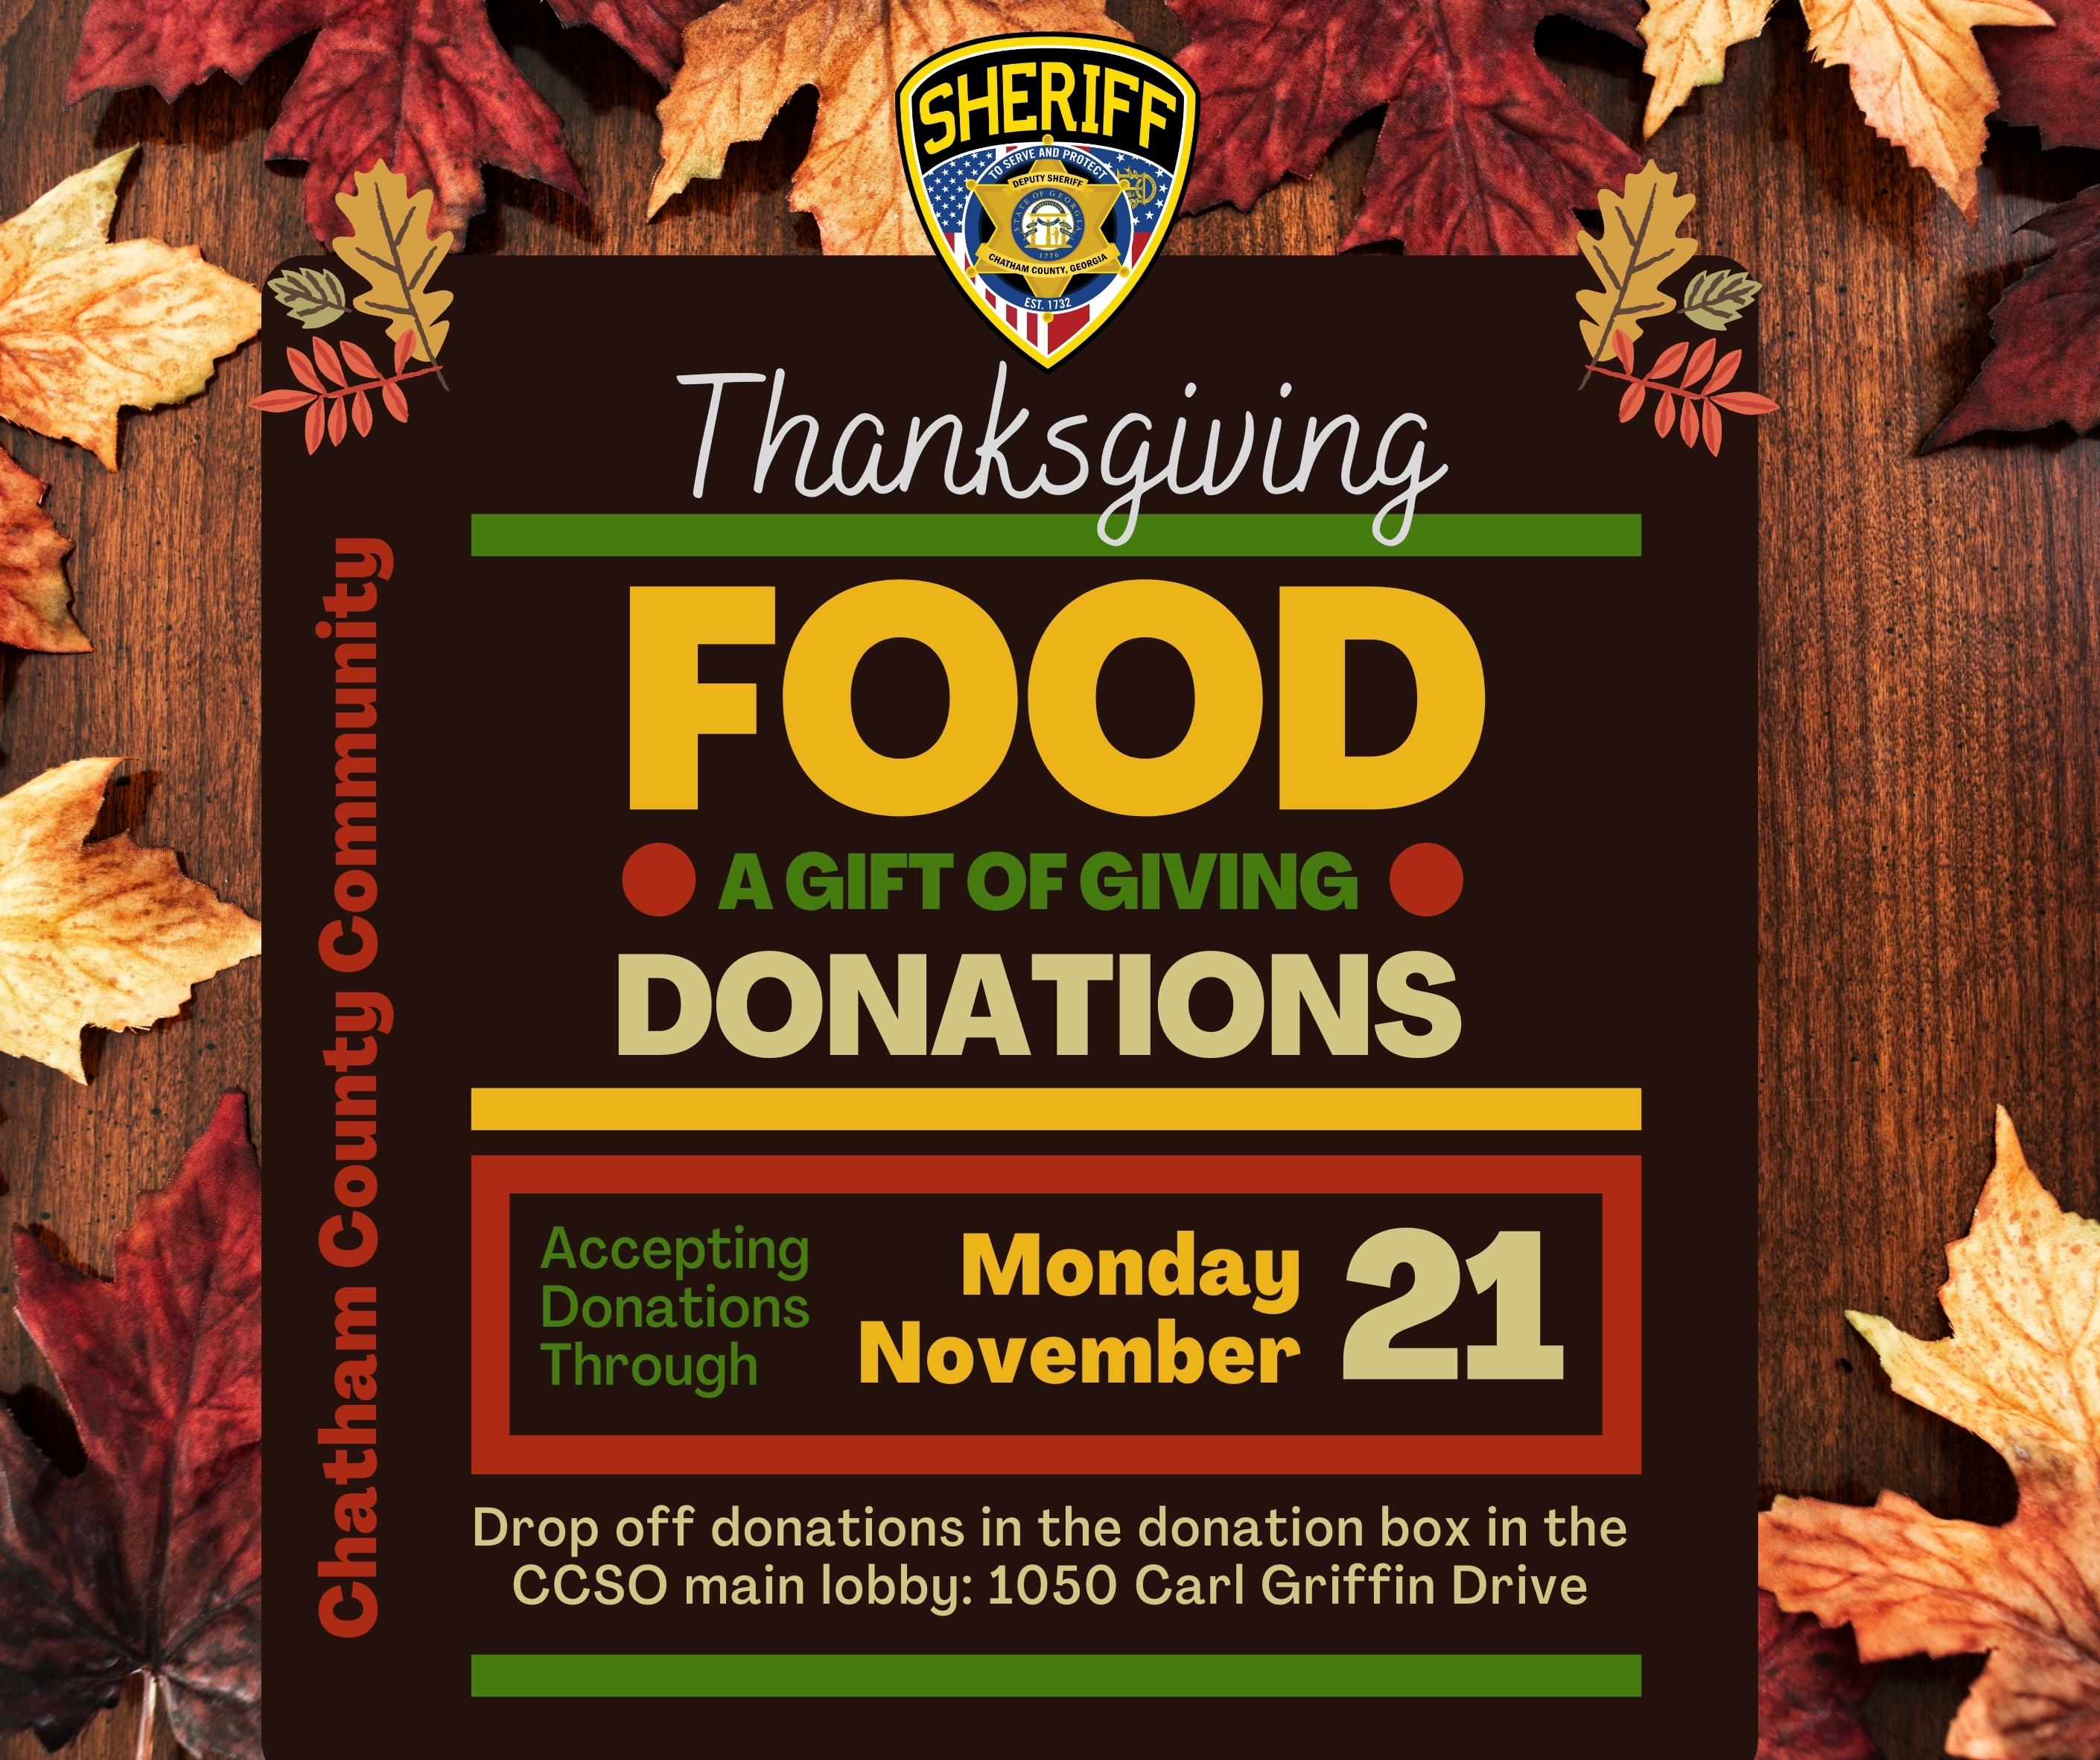 Thanksgiving Food Donations Accepted Through November 21